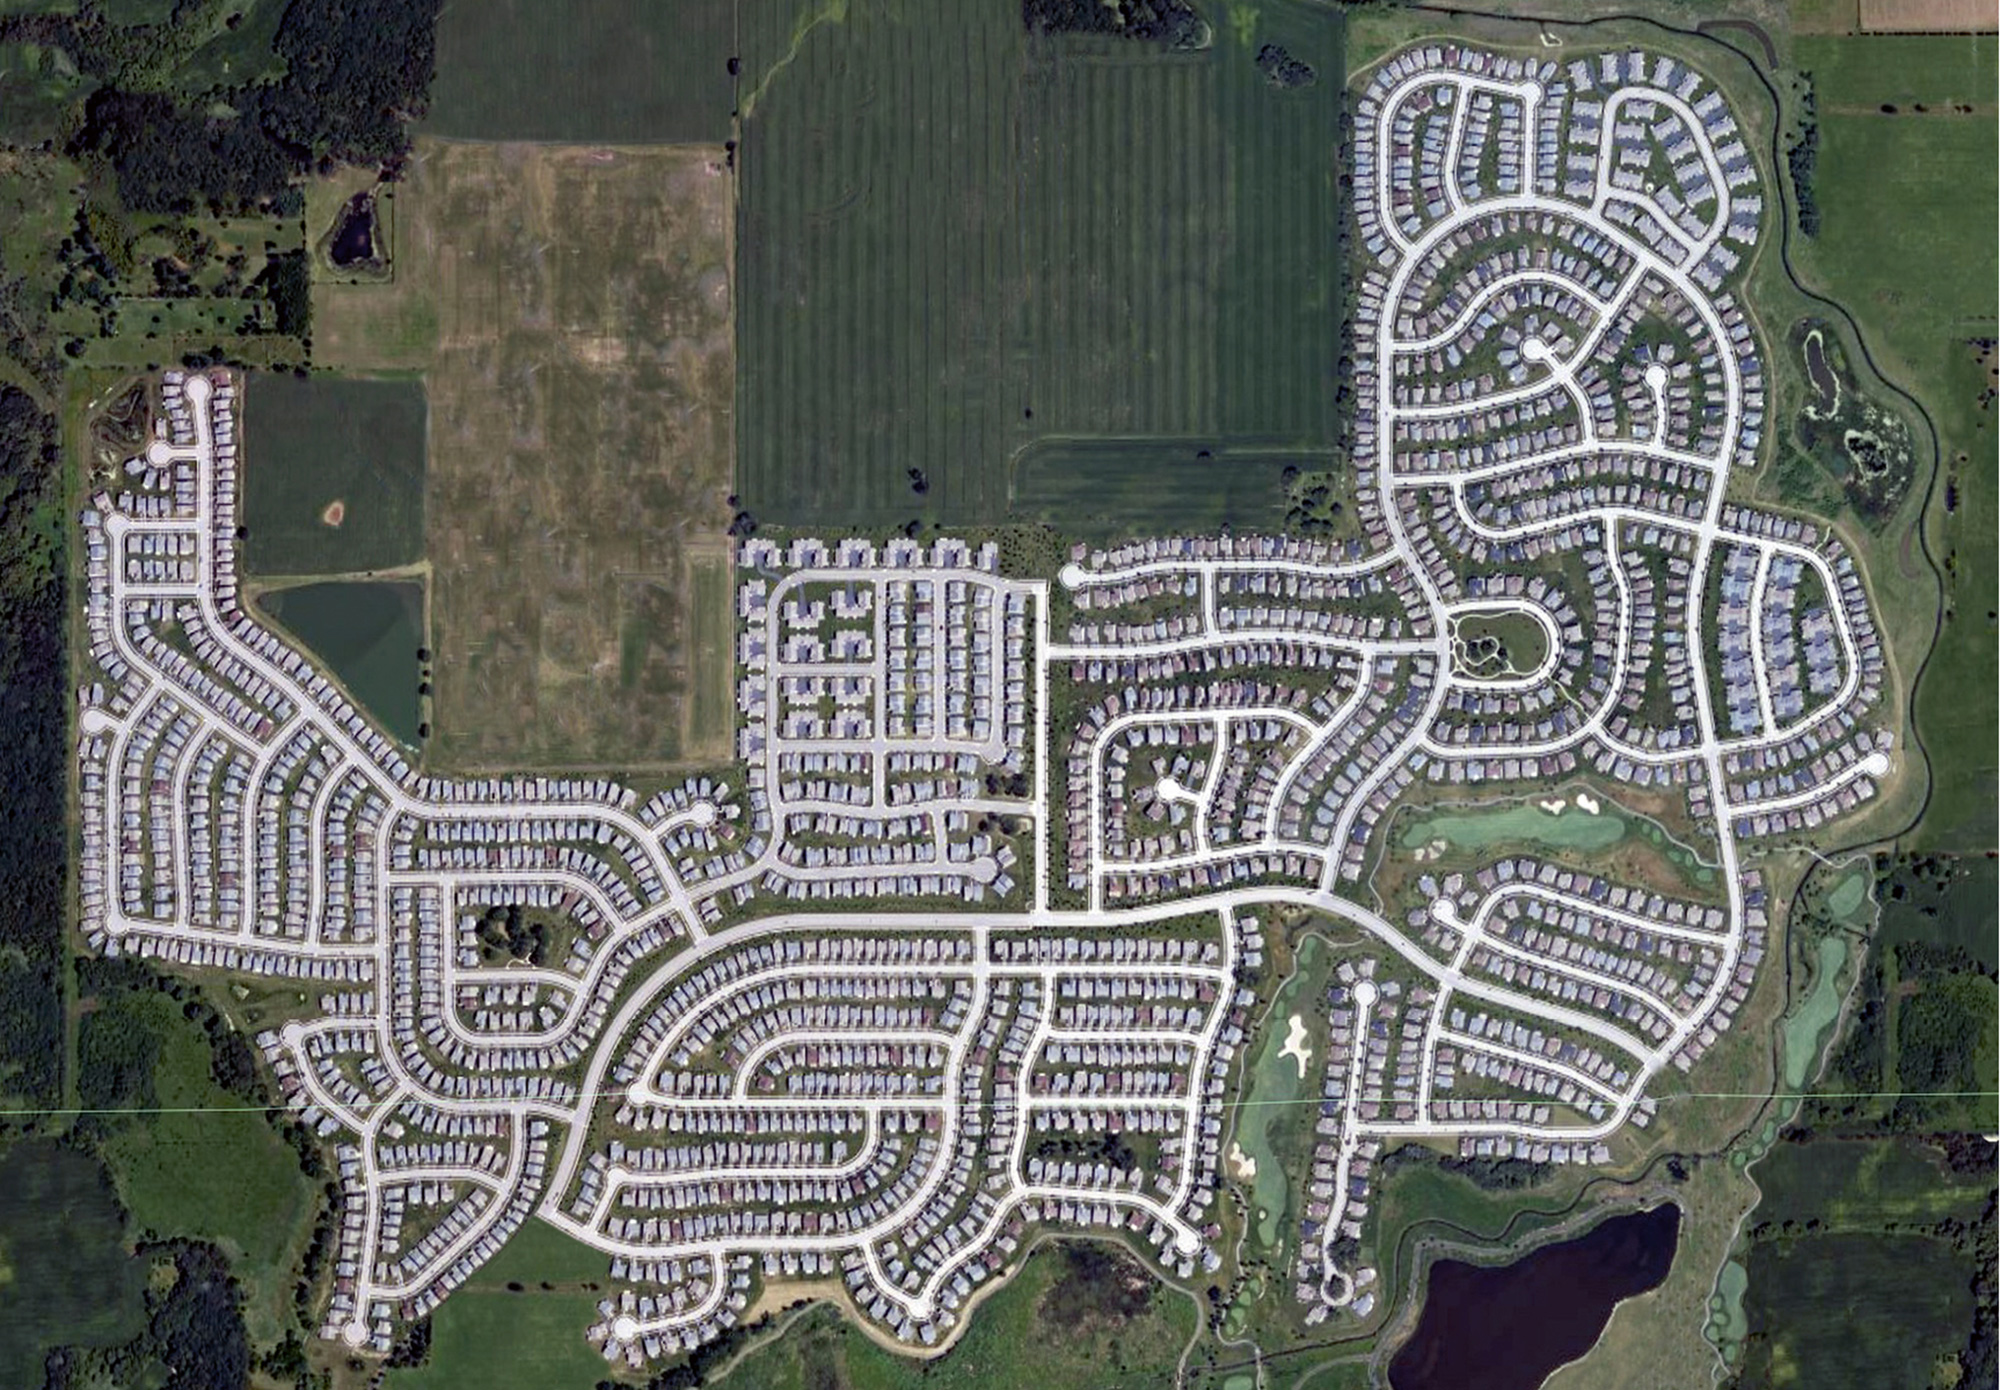 An altered aerial photograph by Jeremy Drummond of a planned housing community in Illinois.